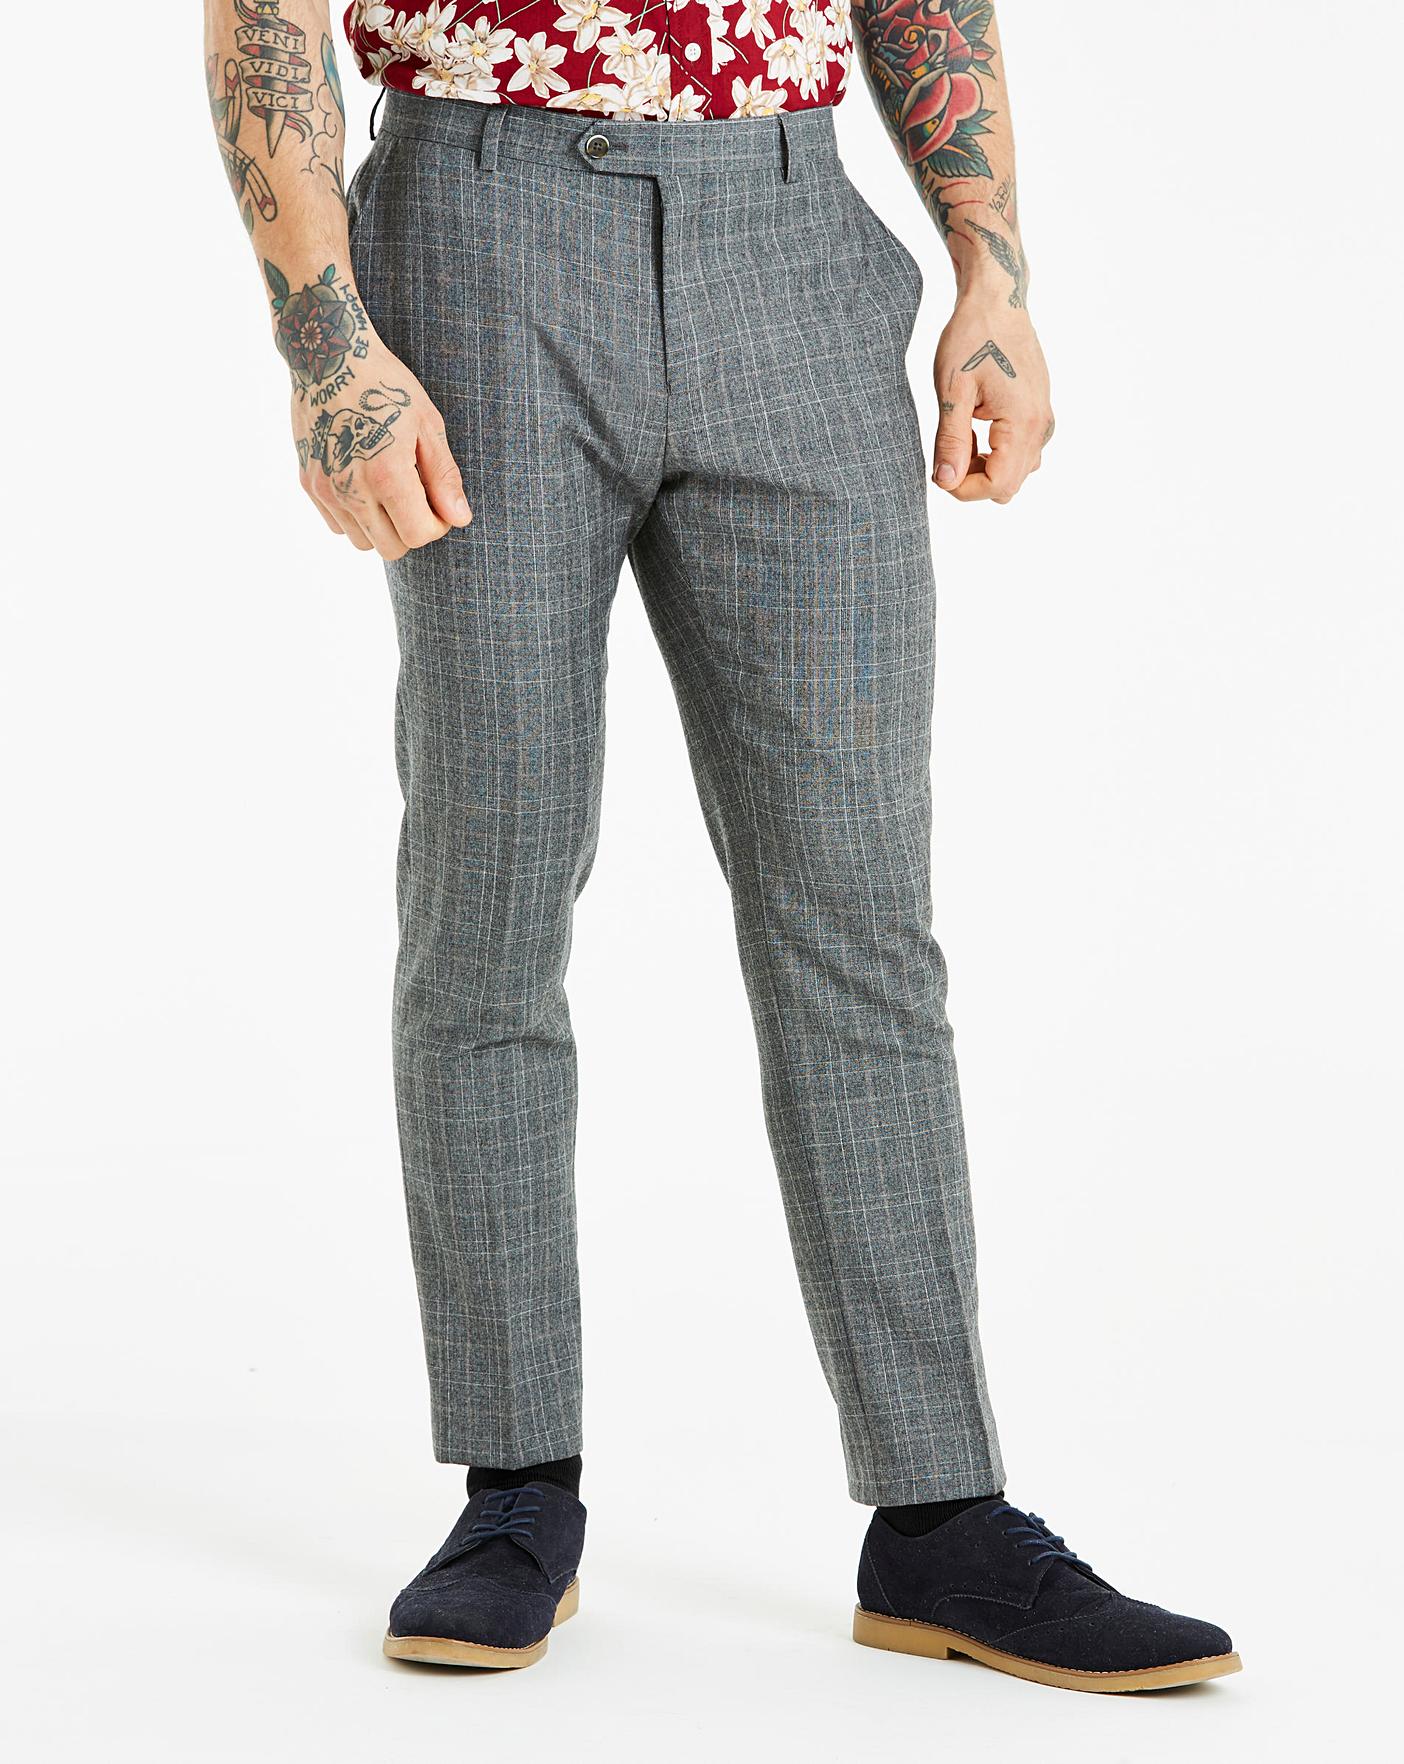 W&B LONDON Slim Fit Check Trousers 31in